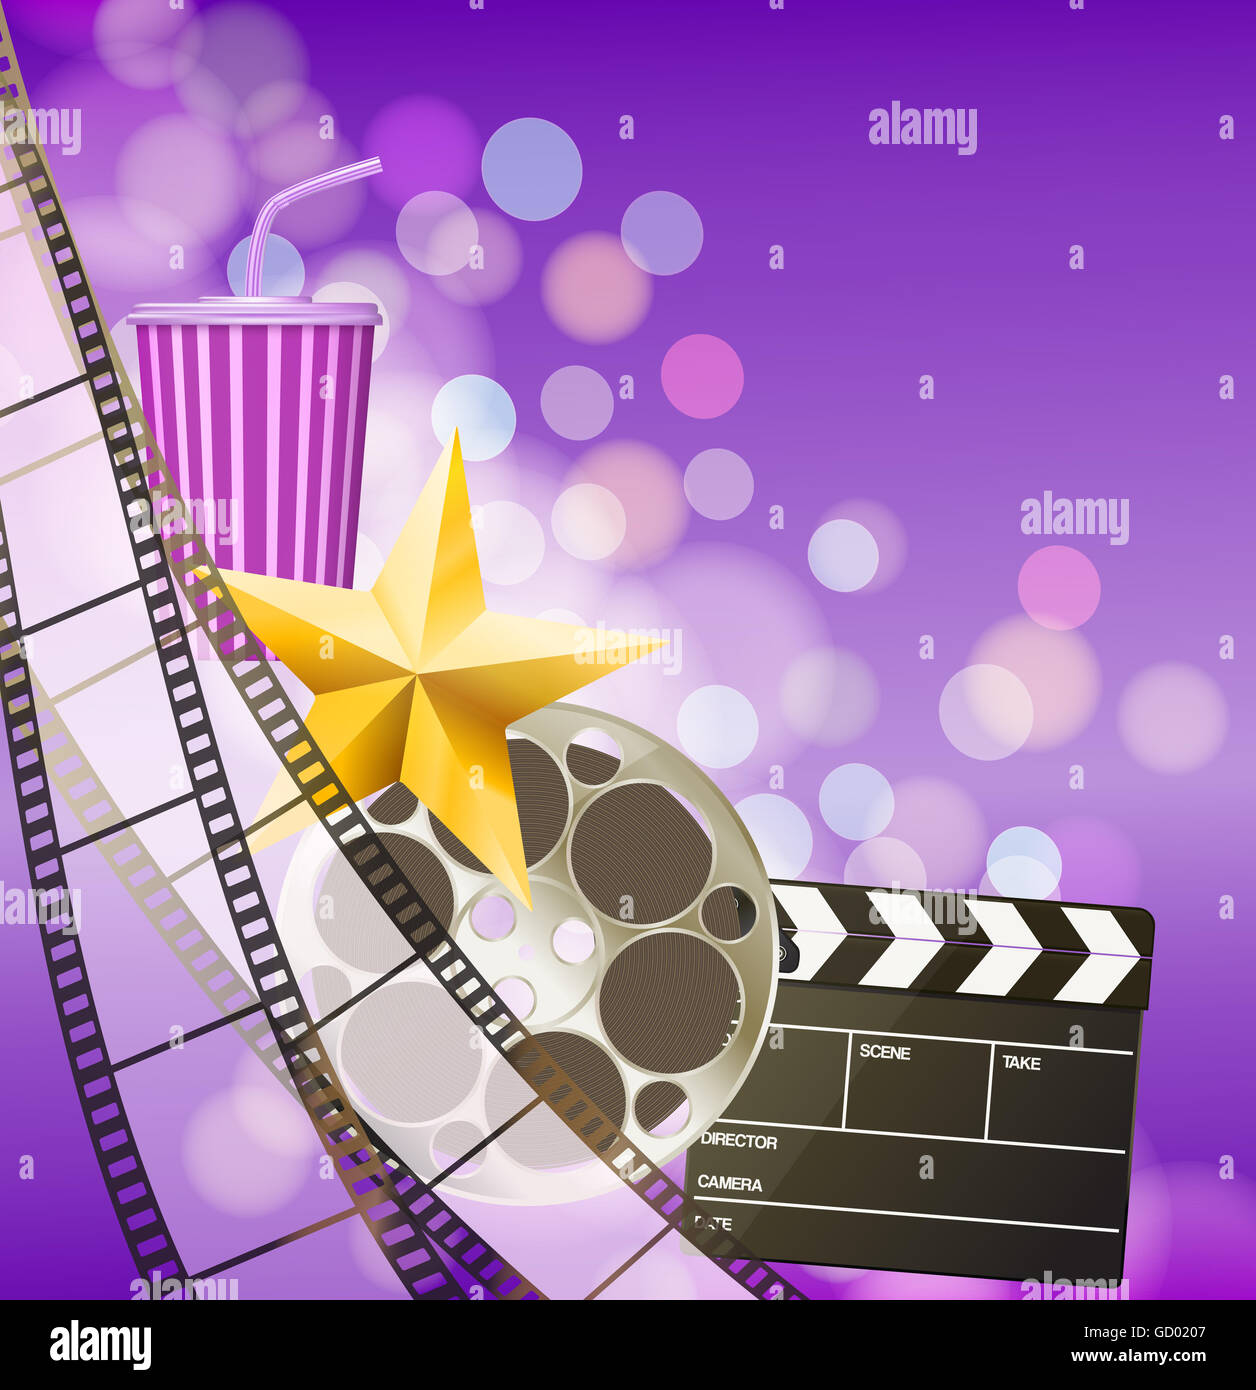 Cinema background with filmstrip, golden star, cup, clapperboard on blurry purple background Stock Photo